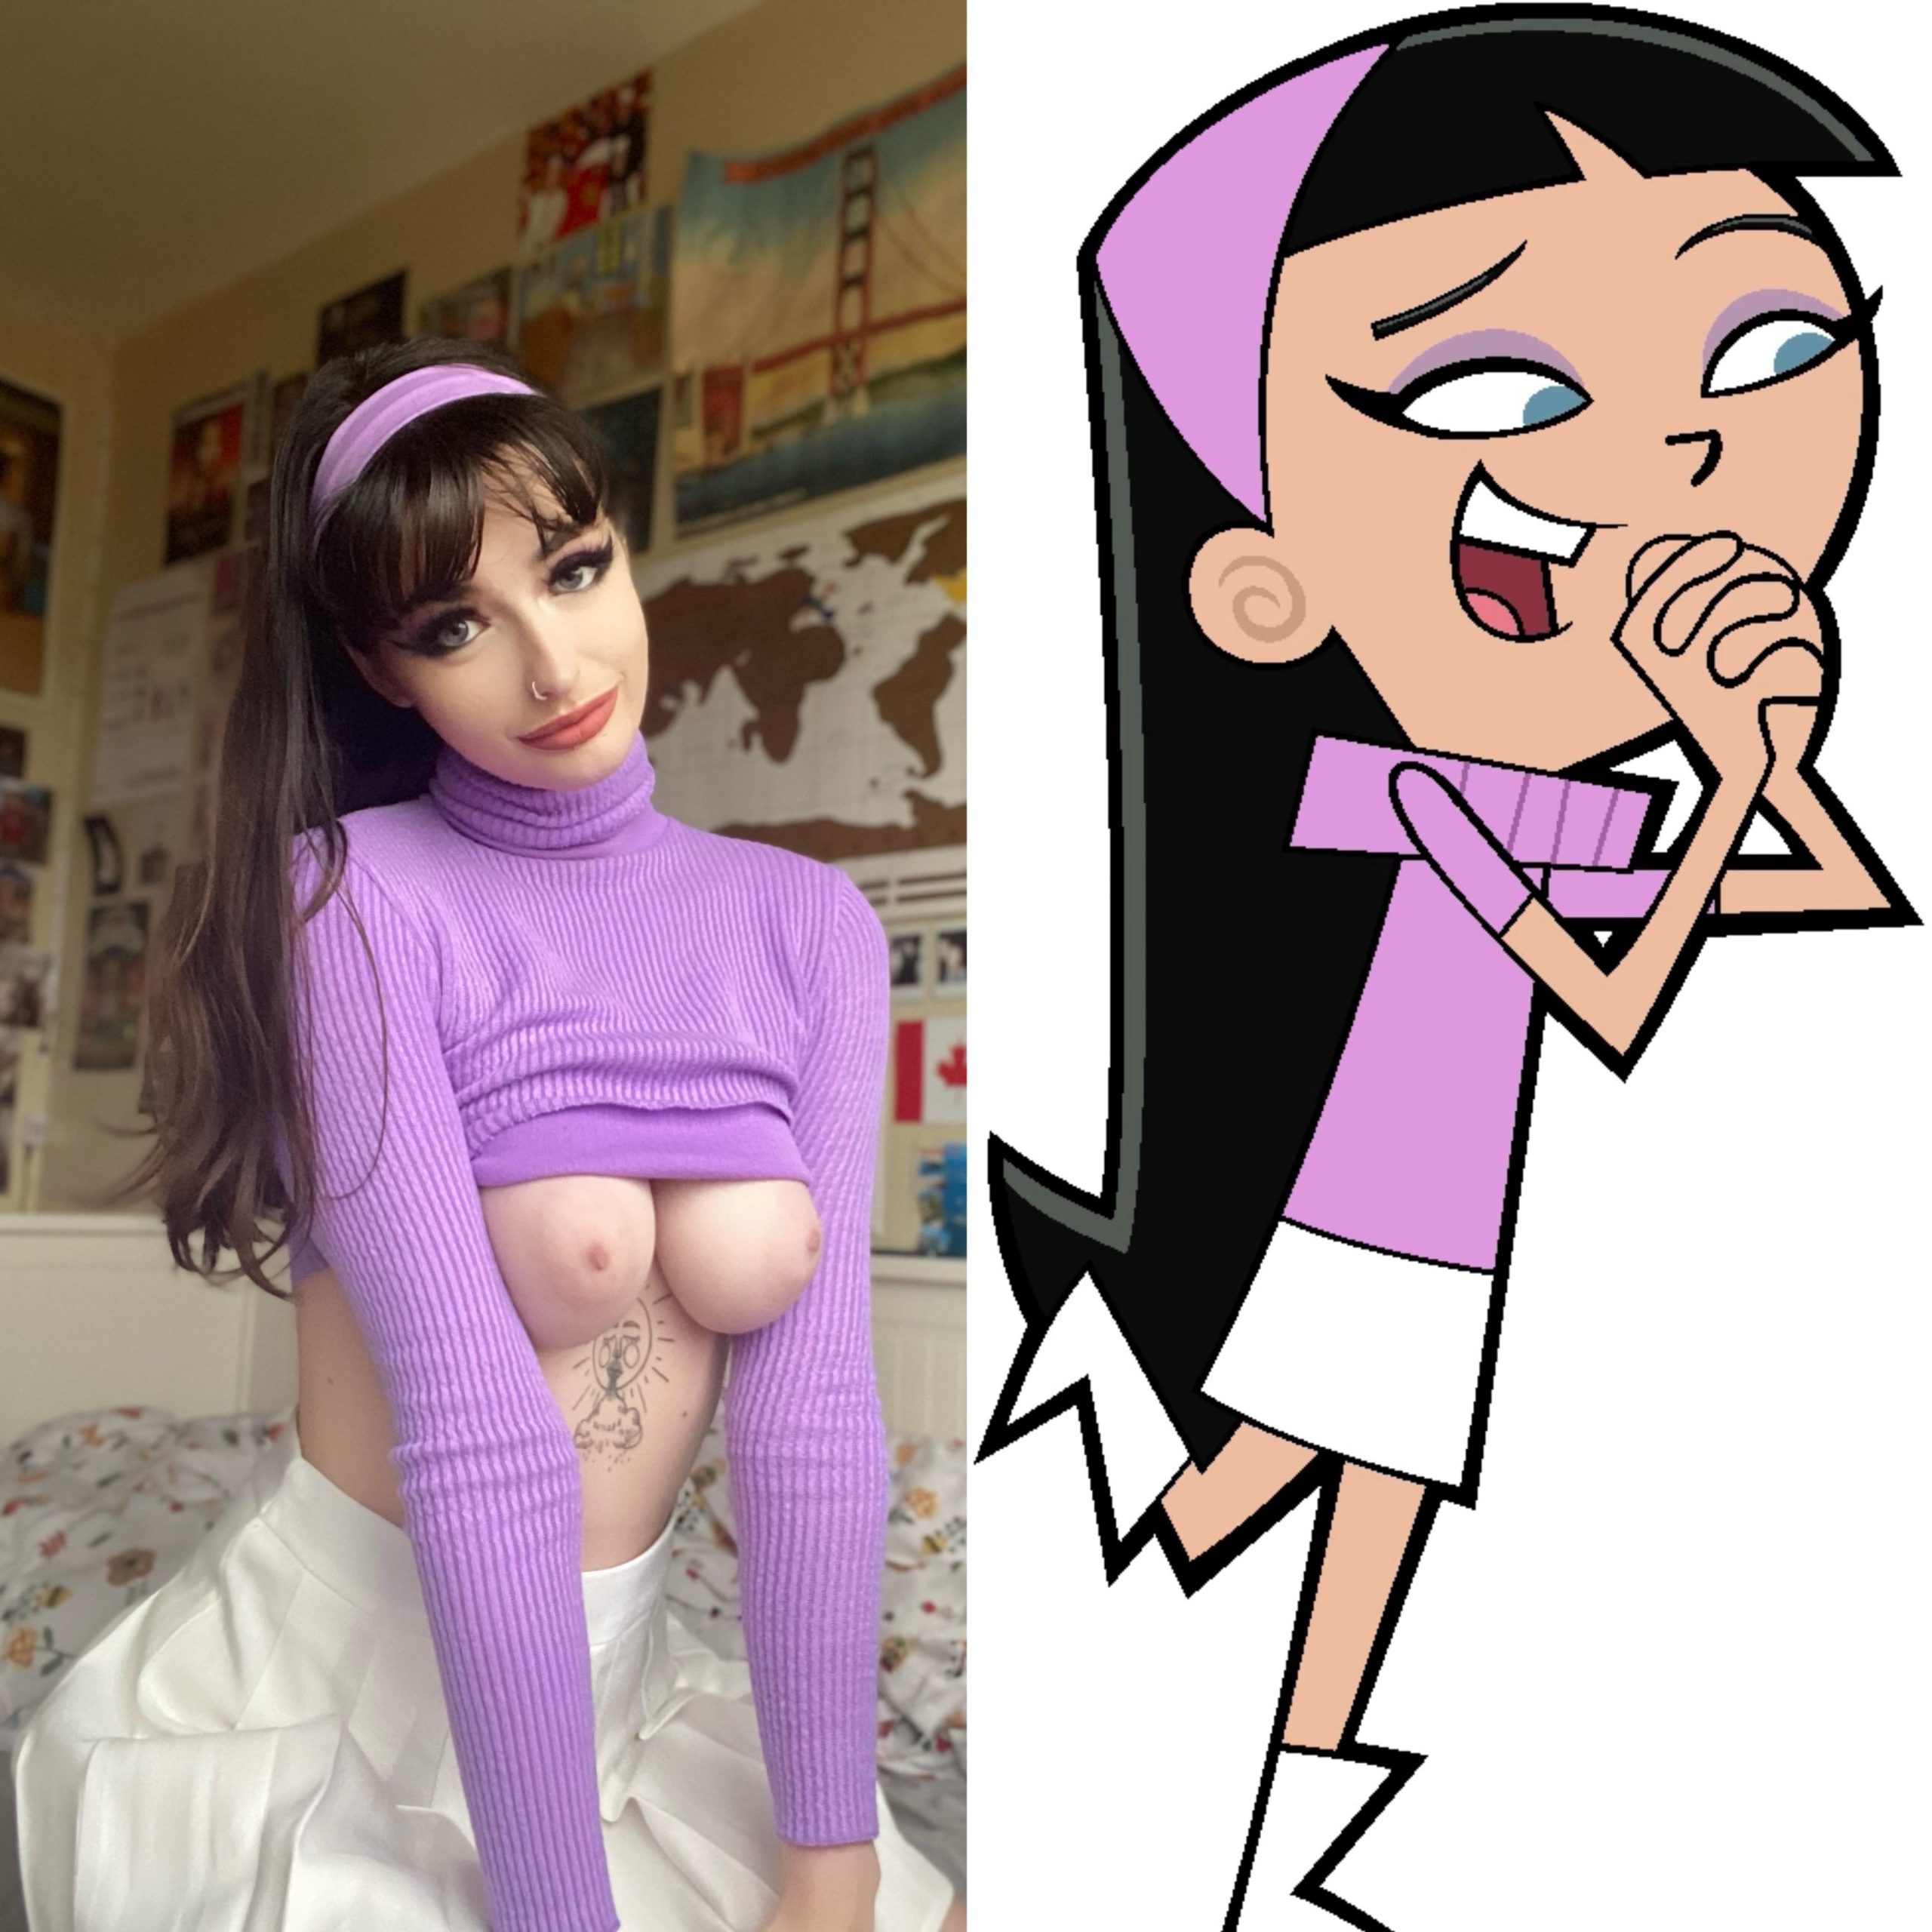 Slutty Trixie Tang From Fairly Odd Parents By U/claudianimhrucu